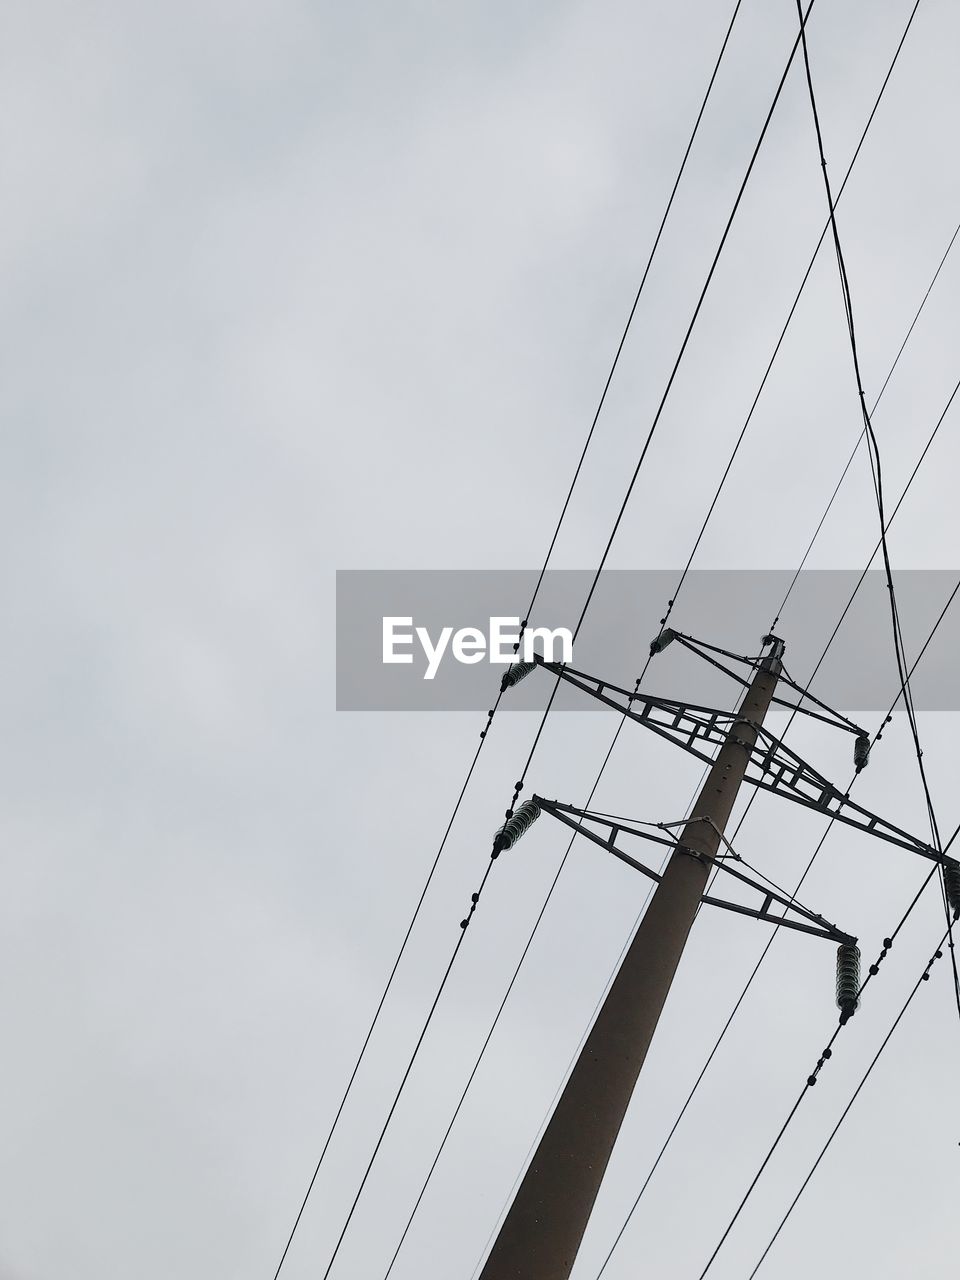 overhead power line, sky, line, electricity, cable, technology, no people, cloud, low angle view, nature, electrical supply, mast, transmission tower, power supply, outdoors, day, sailboat, power generation, pole, power line, tower, antenna, transportation